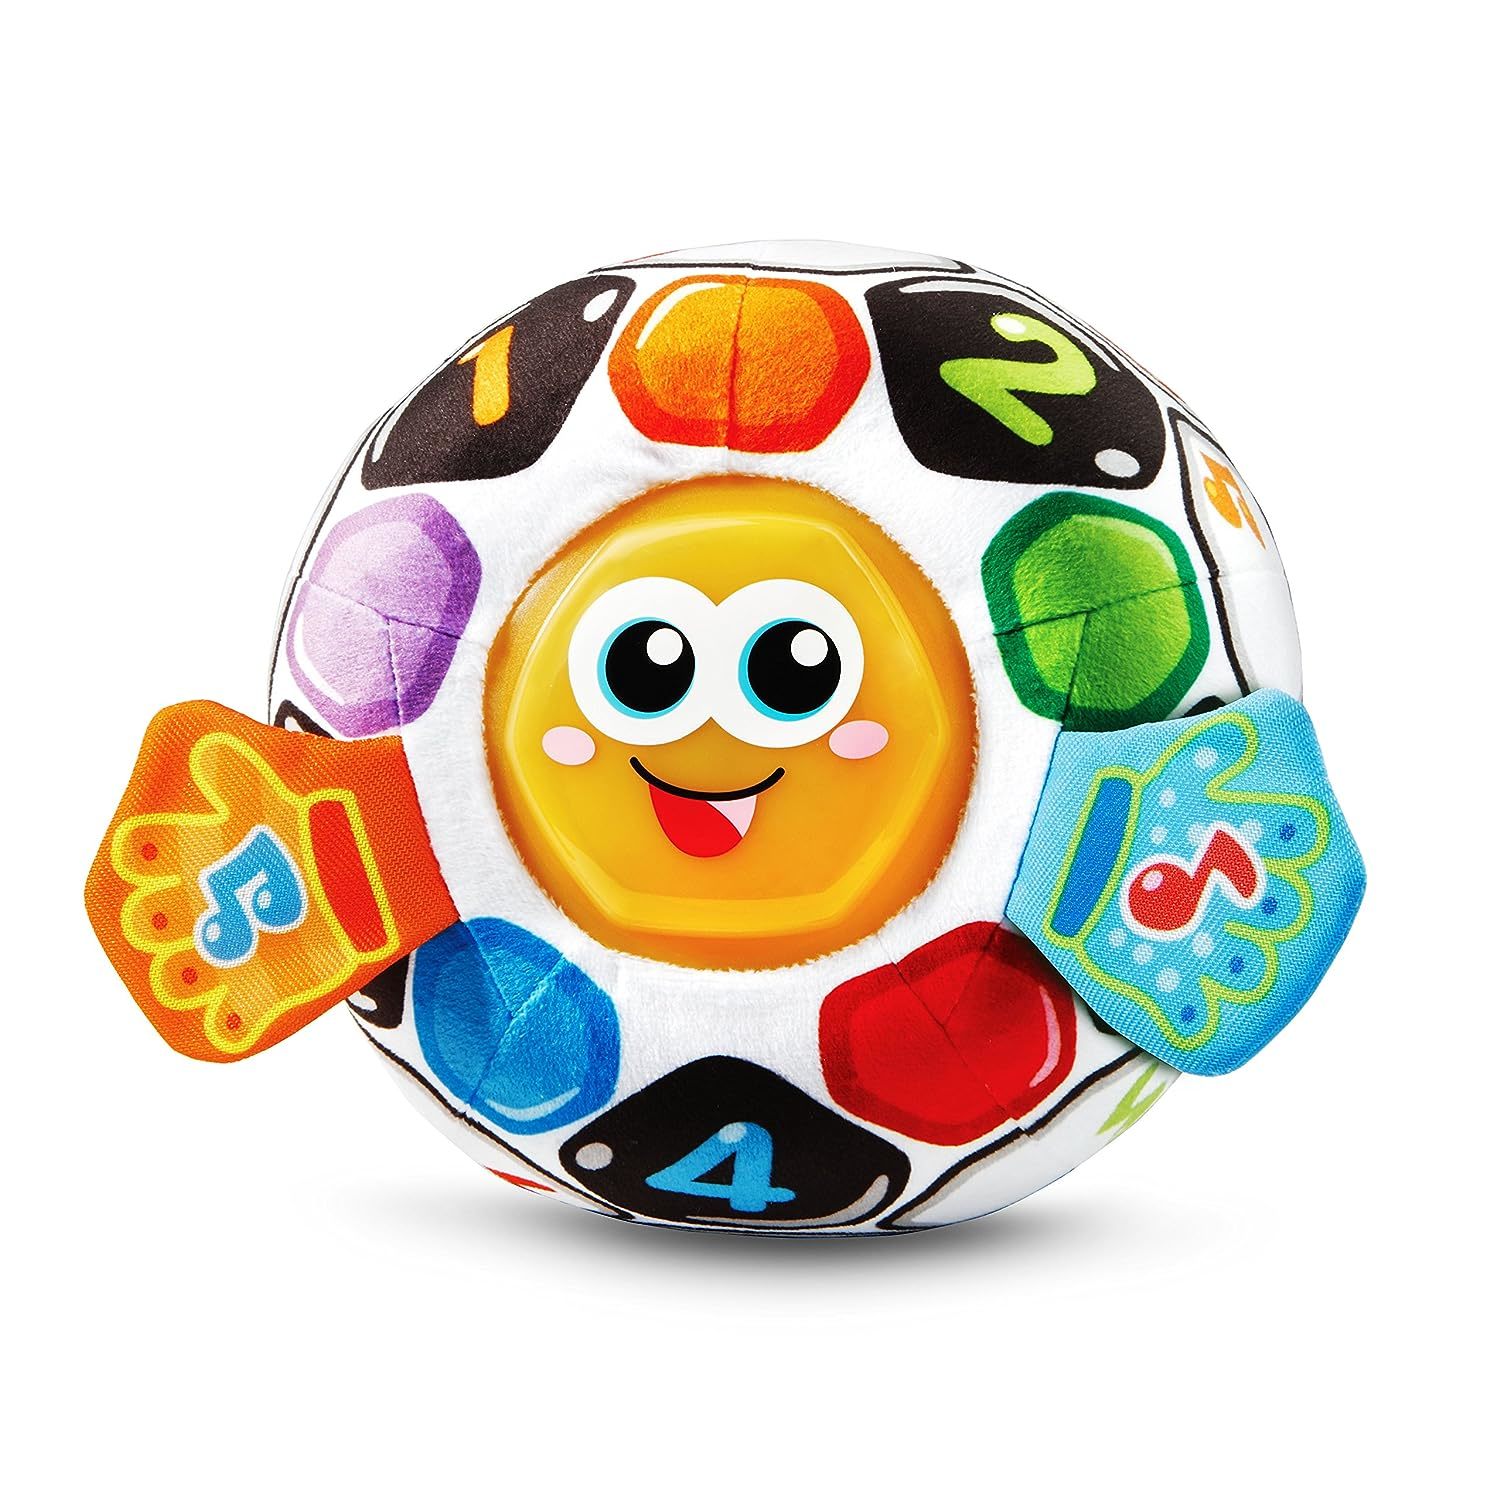 VTech Bright Lights Soccer Ball, Multicolor, for 6 months to 36 months - $25.99